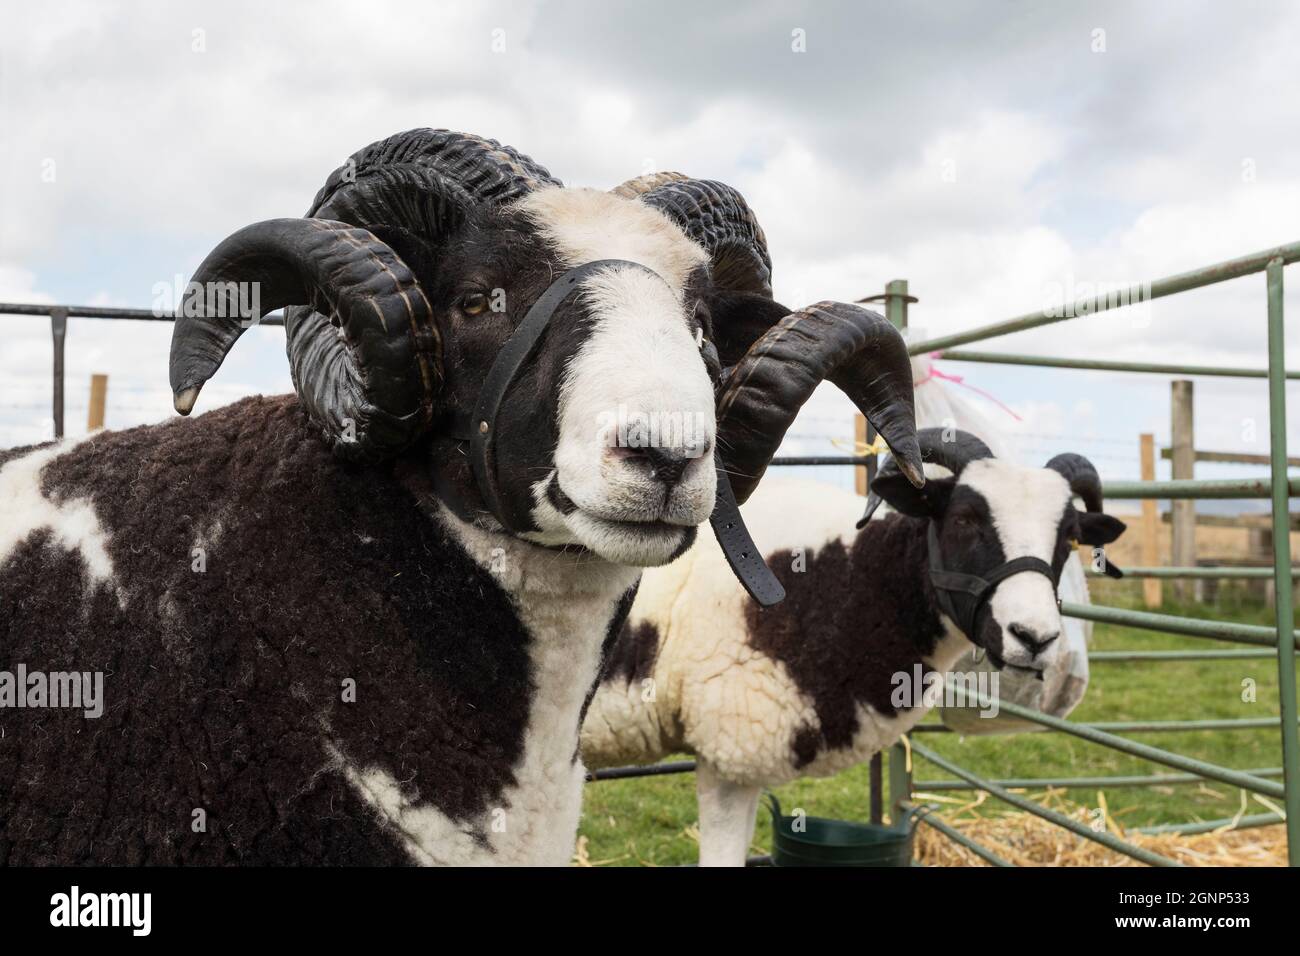 Jacob sheep in pen, Appleby show, Appleby-in-Westmorland, Cumbria Stock Photo